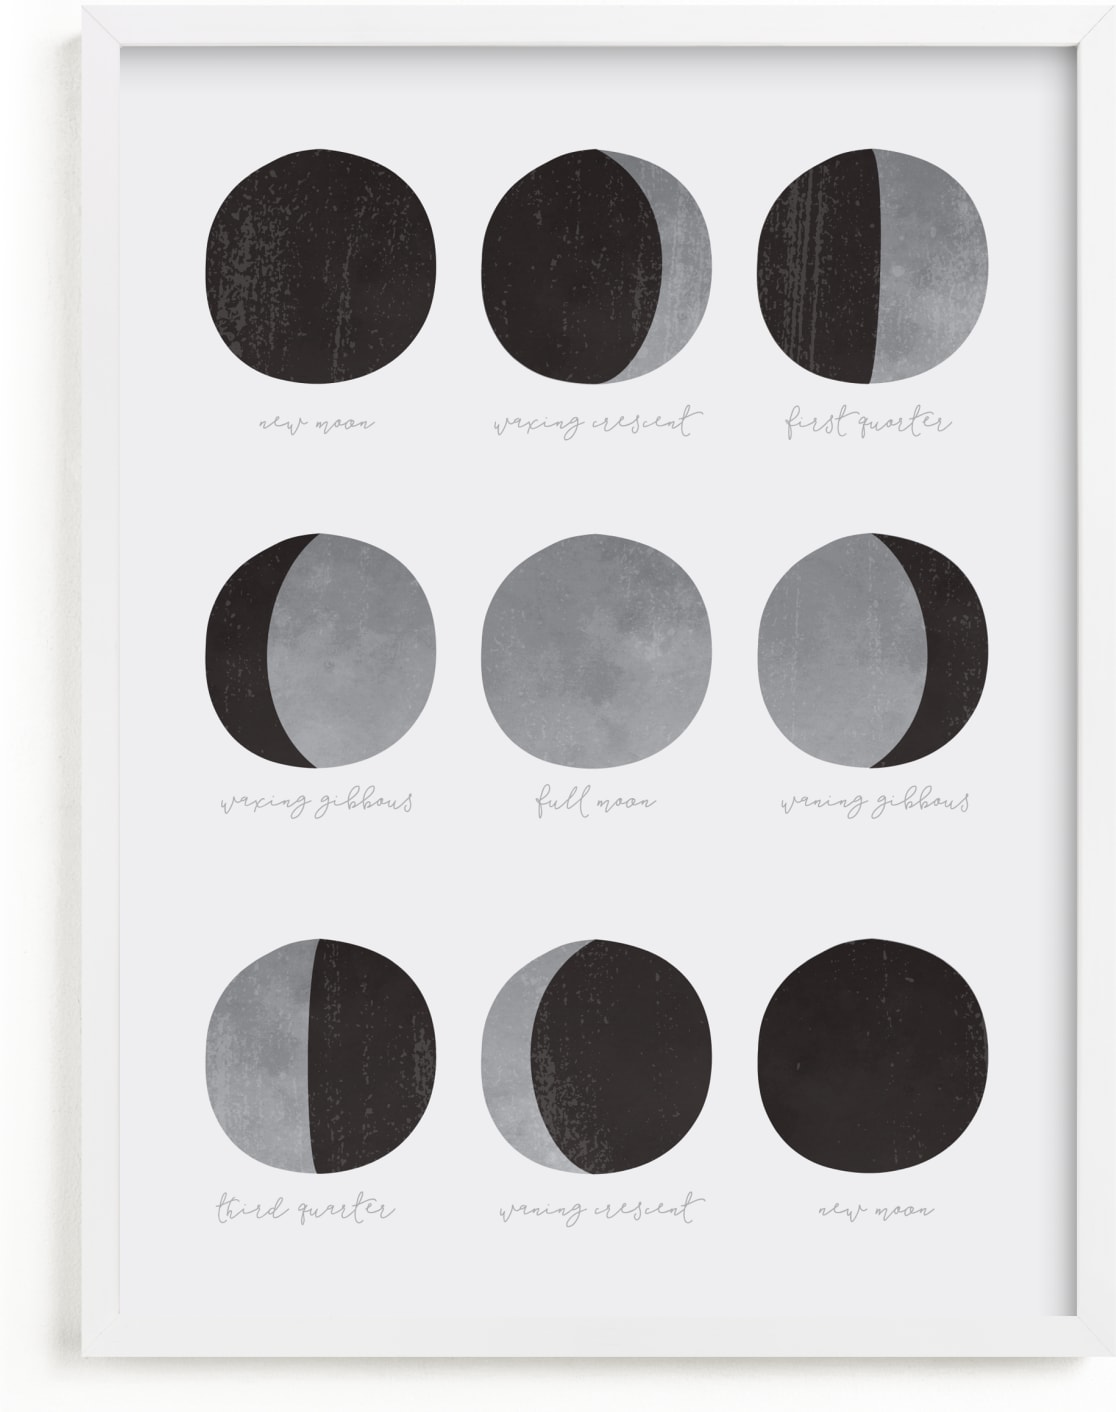 This is a grey kids wall art by Dawn Jasper called the lunar cycle.